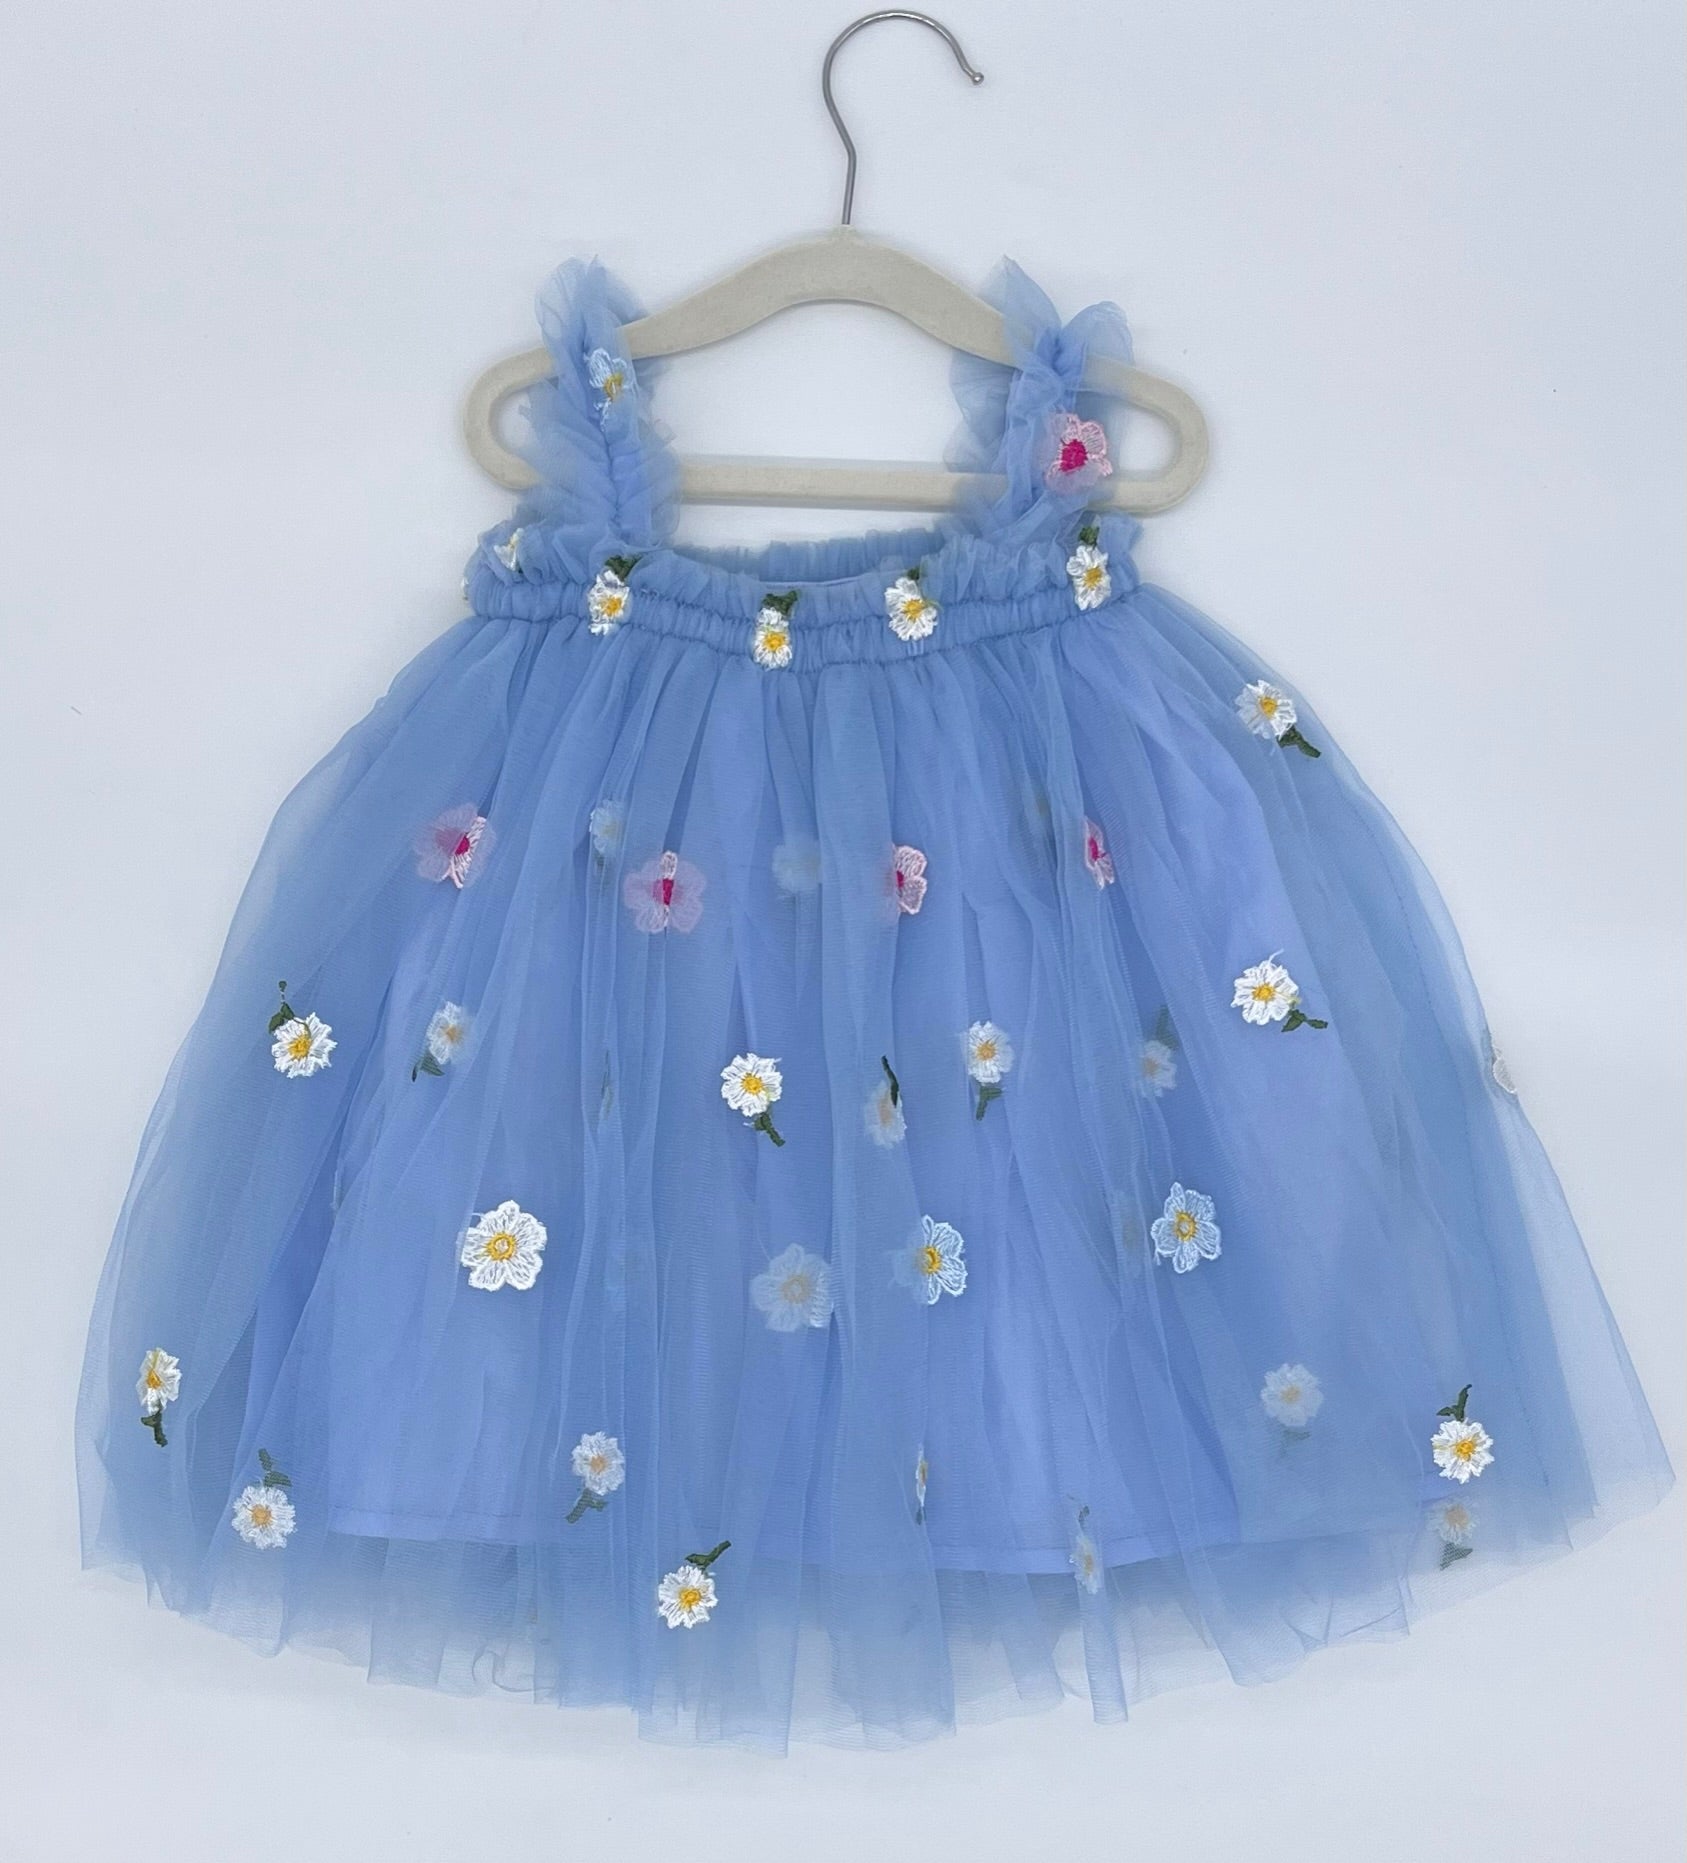 Blue Tulle Dress with Embroided Flowers